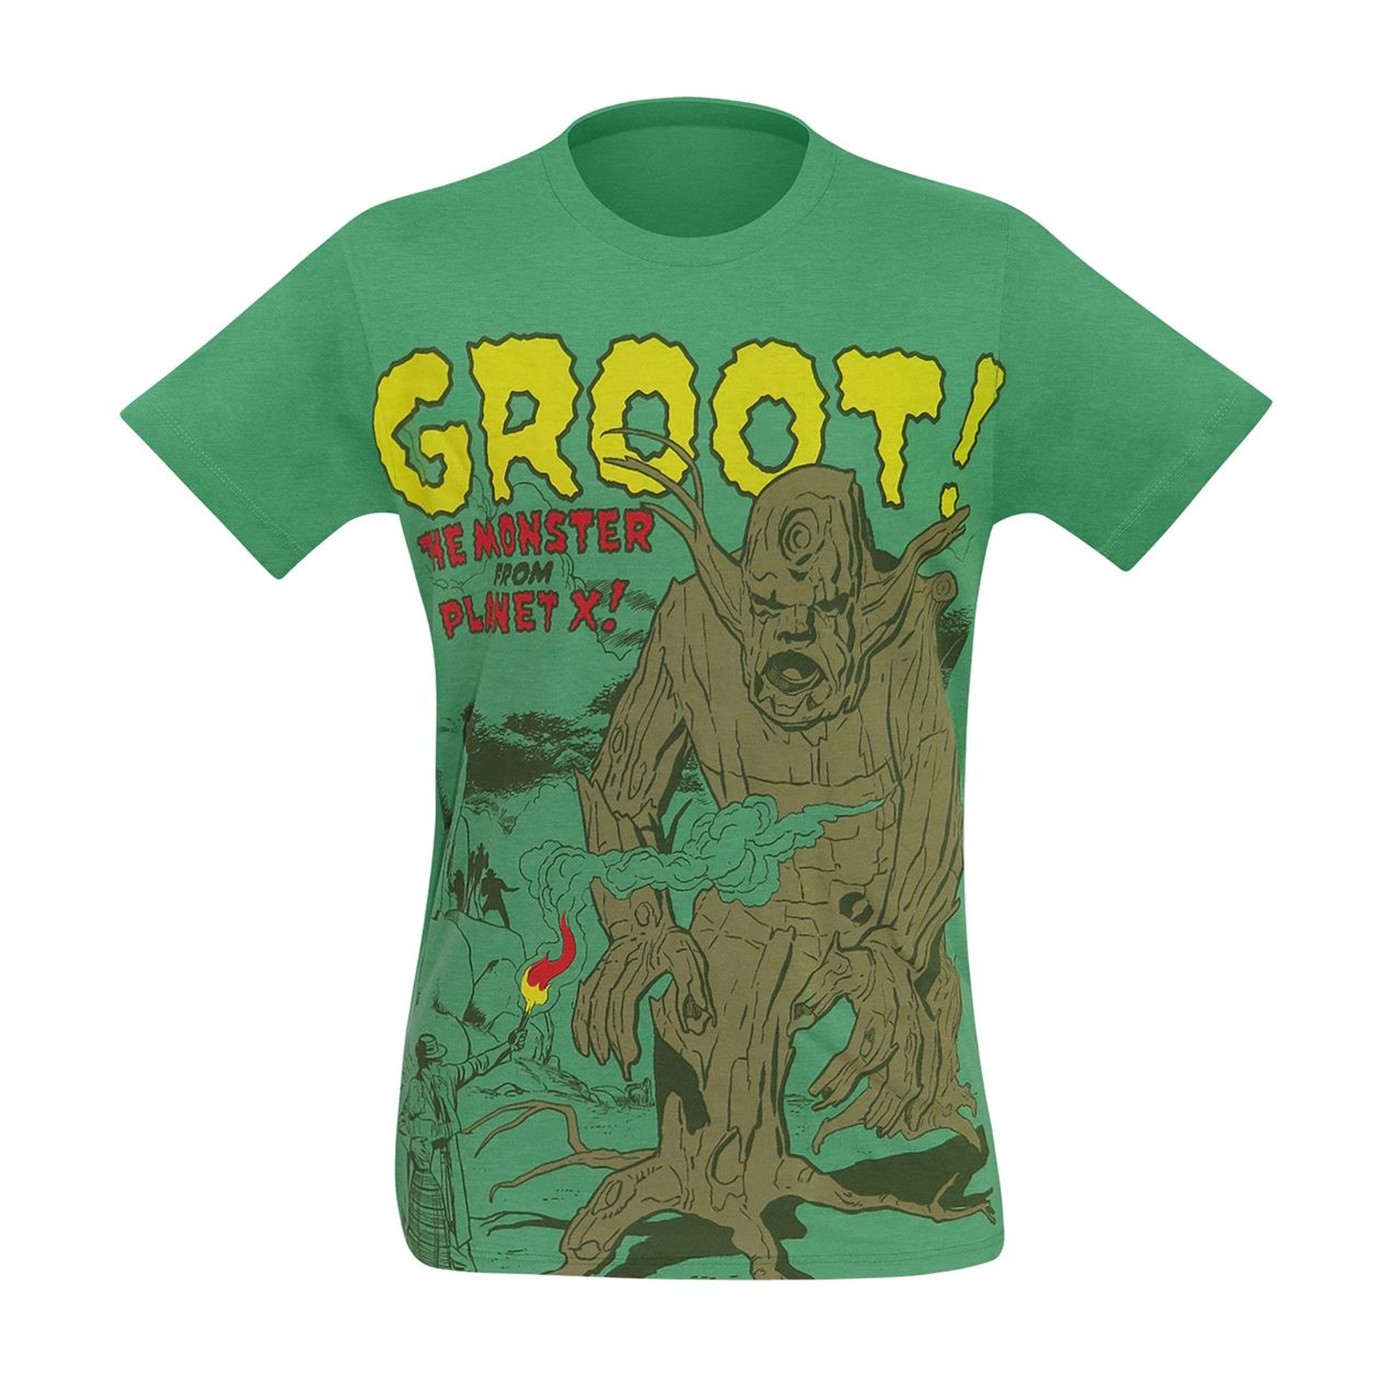 GOTG Groot The Monster From Planet X Men's T-Shirt